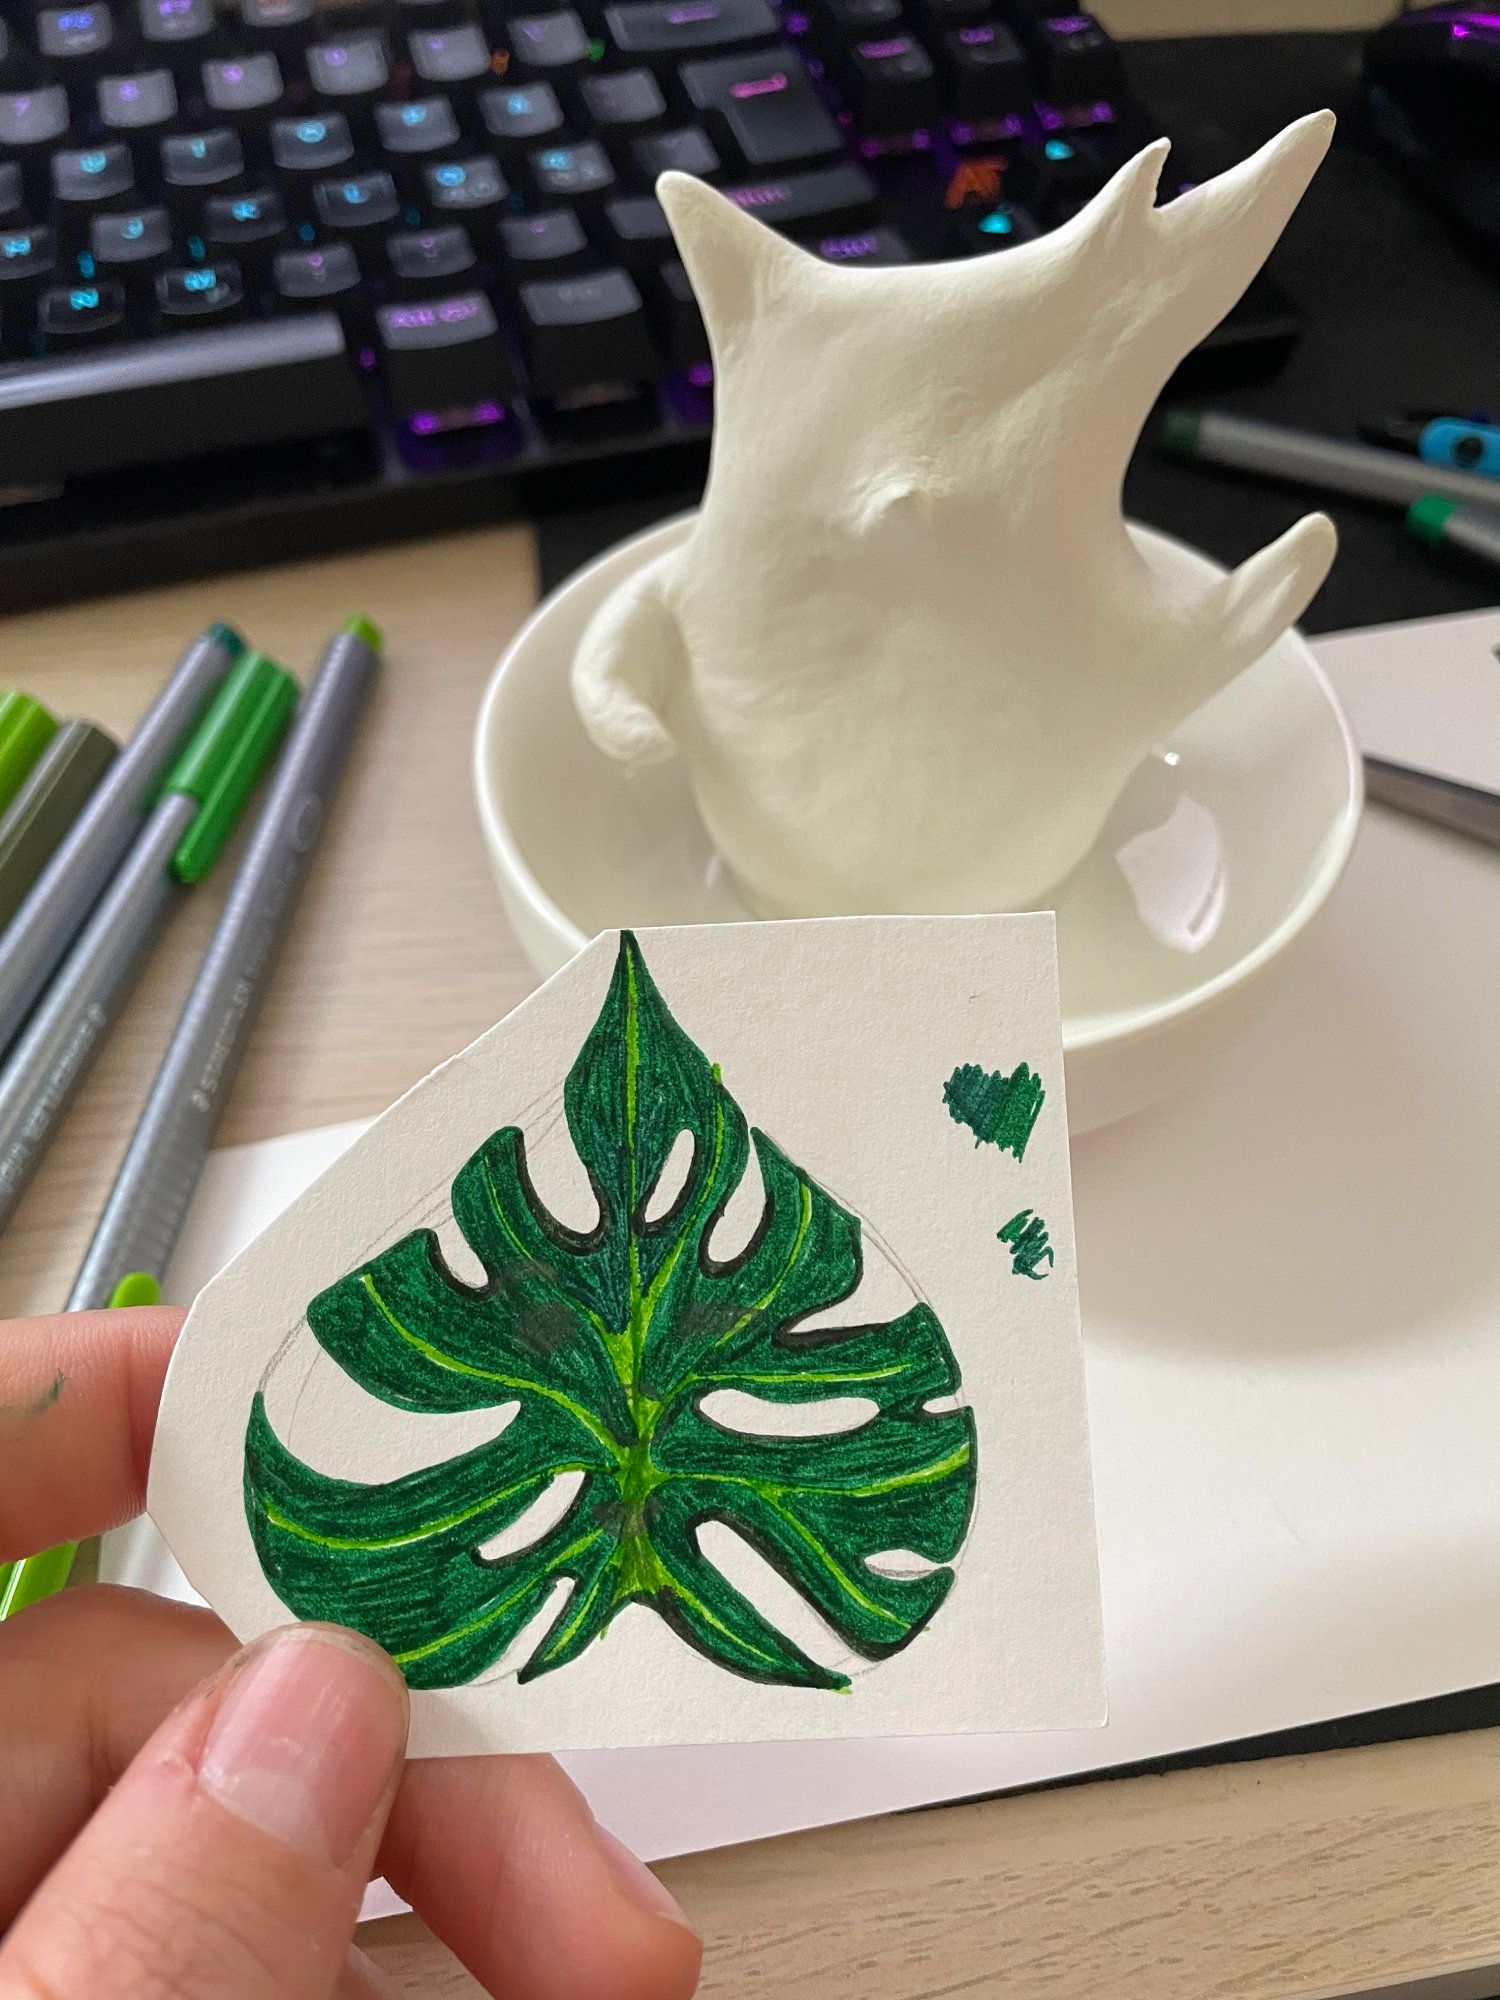 A monstera leaf drawn on a piece of paper in the foreground, and a white figurine on a saucer in the background